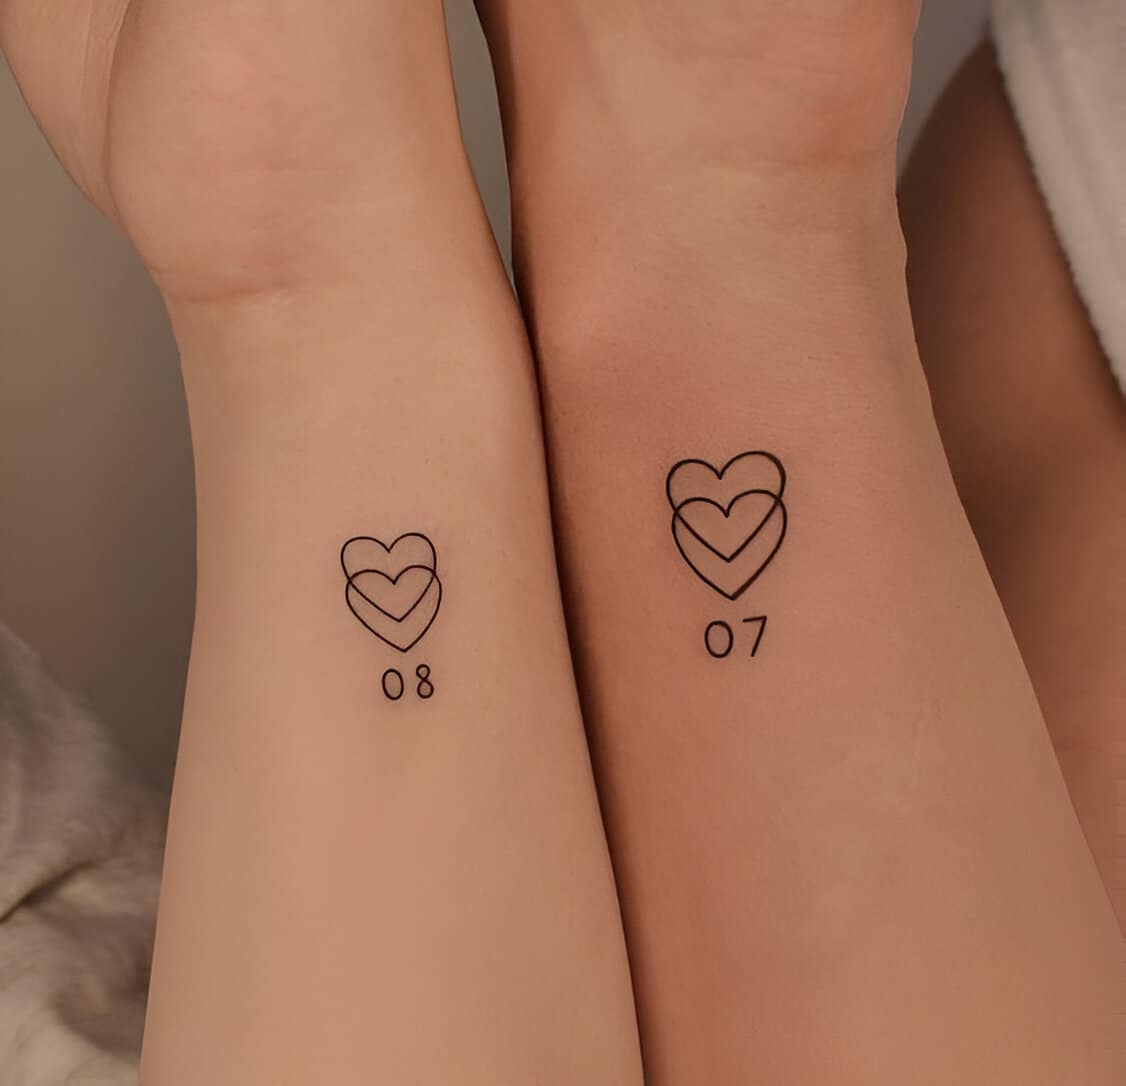 30 Elegant Matching Heart Tattoos To Get With Your Partner ASAP 4